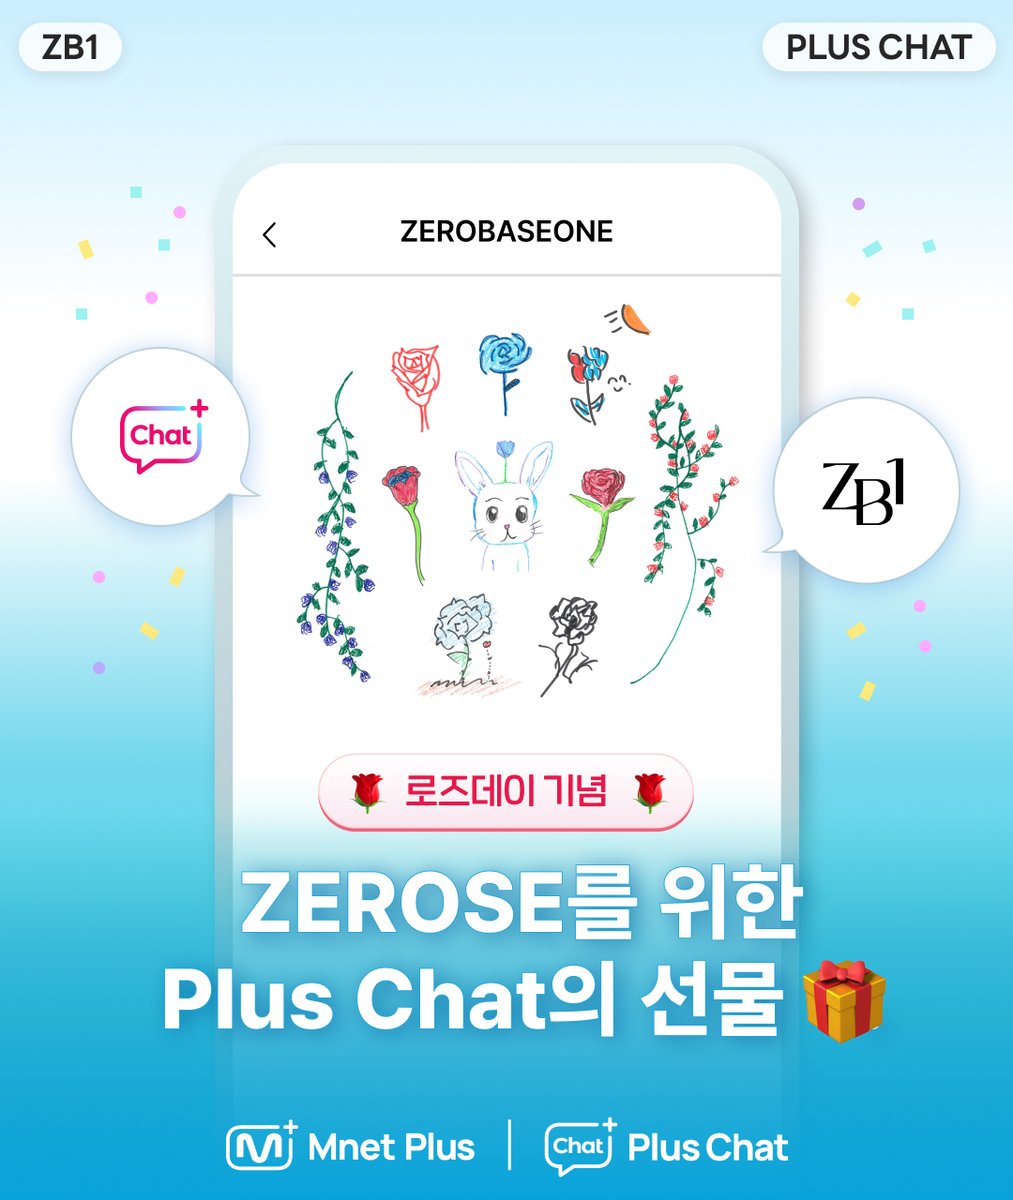 [#PlusChat] #ZB1 Chat 배경화면 특전 제공🎉 로즈데이 기념 선물🌹 ZEROSE를 위한 배경화면으로 ZB1 Chat을 즐겨보세요! - #ZB1 Chat exclusive wallpaper🎉 Rose Day gifts🌹 Enjoy ZB1 Chat with wallpapers designed for ZEROSE! #플러스챗 @ZB1_official #제로베이스원